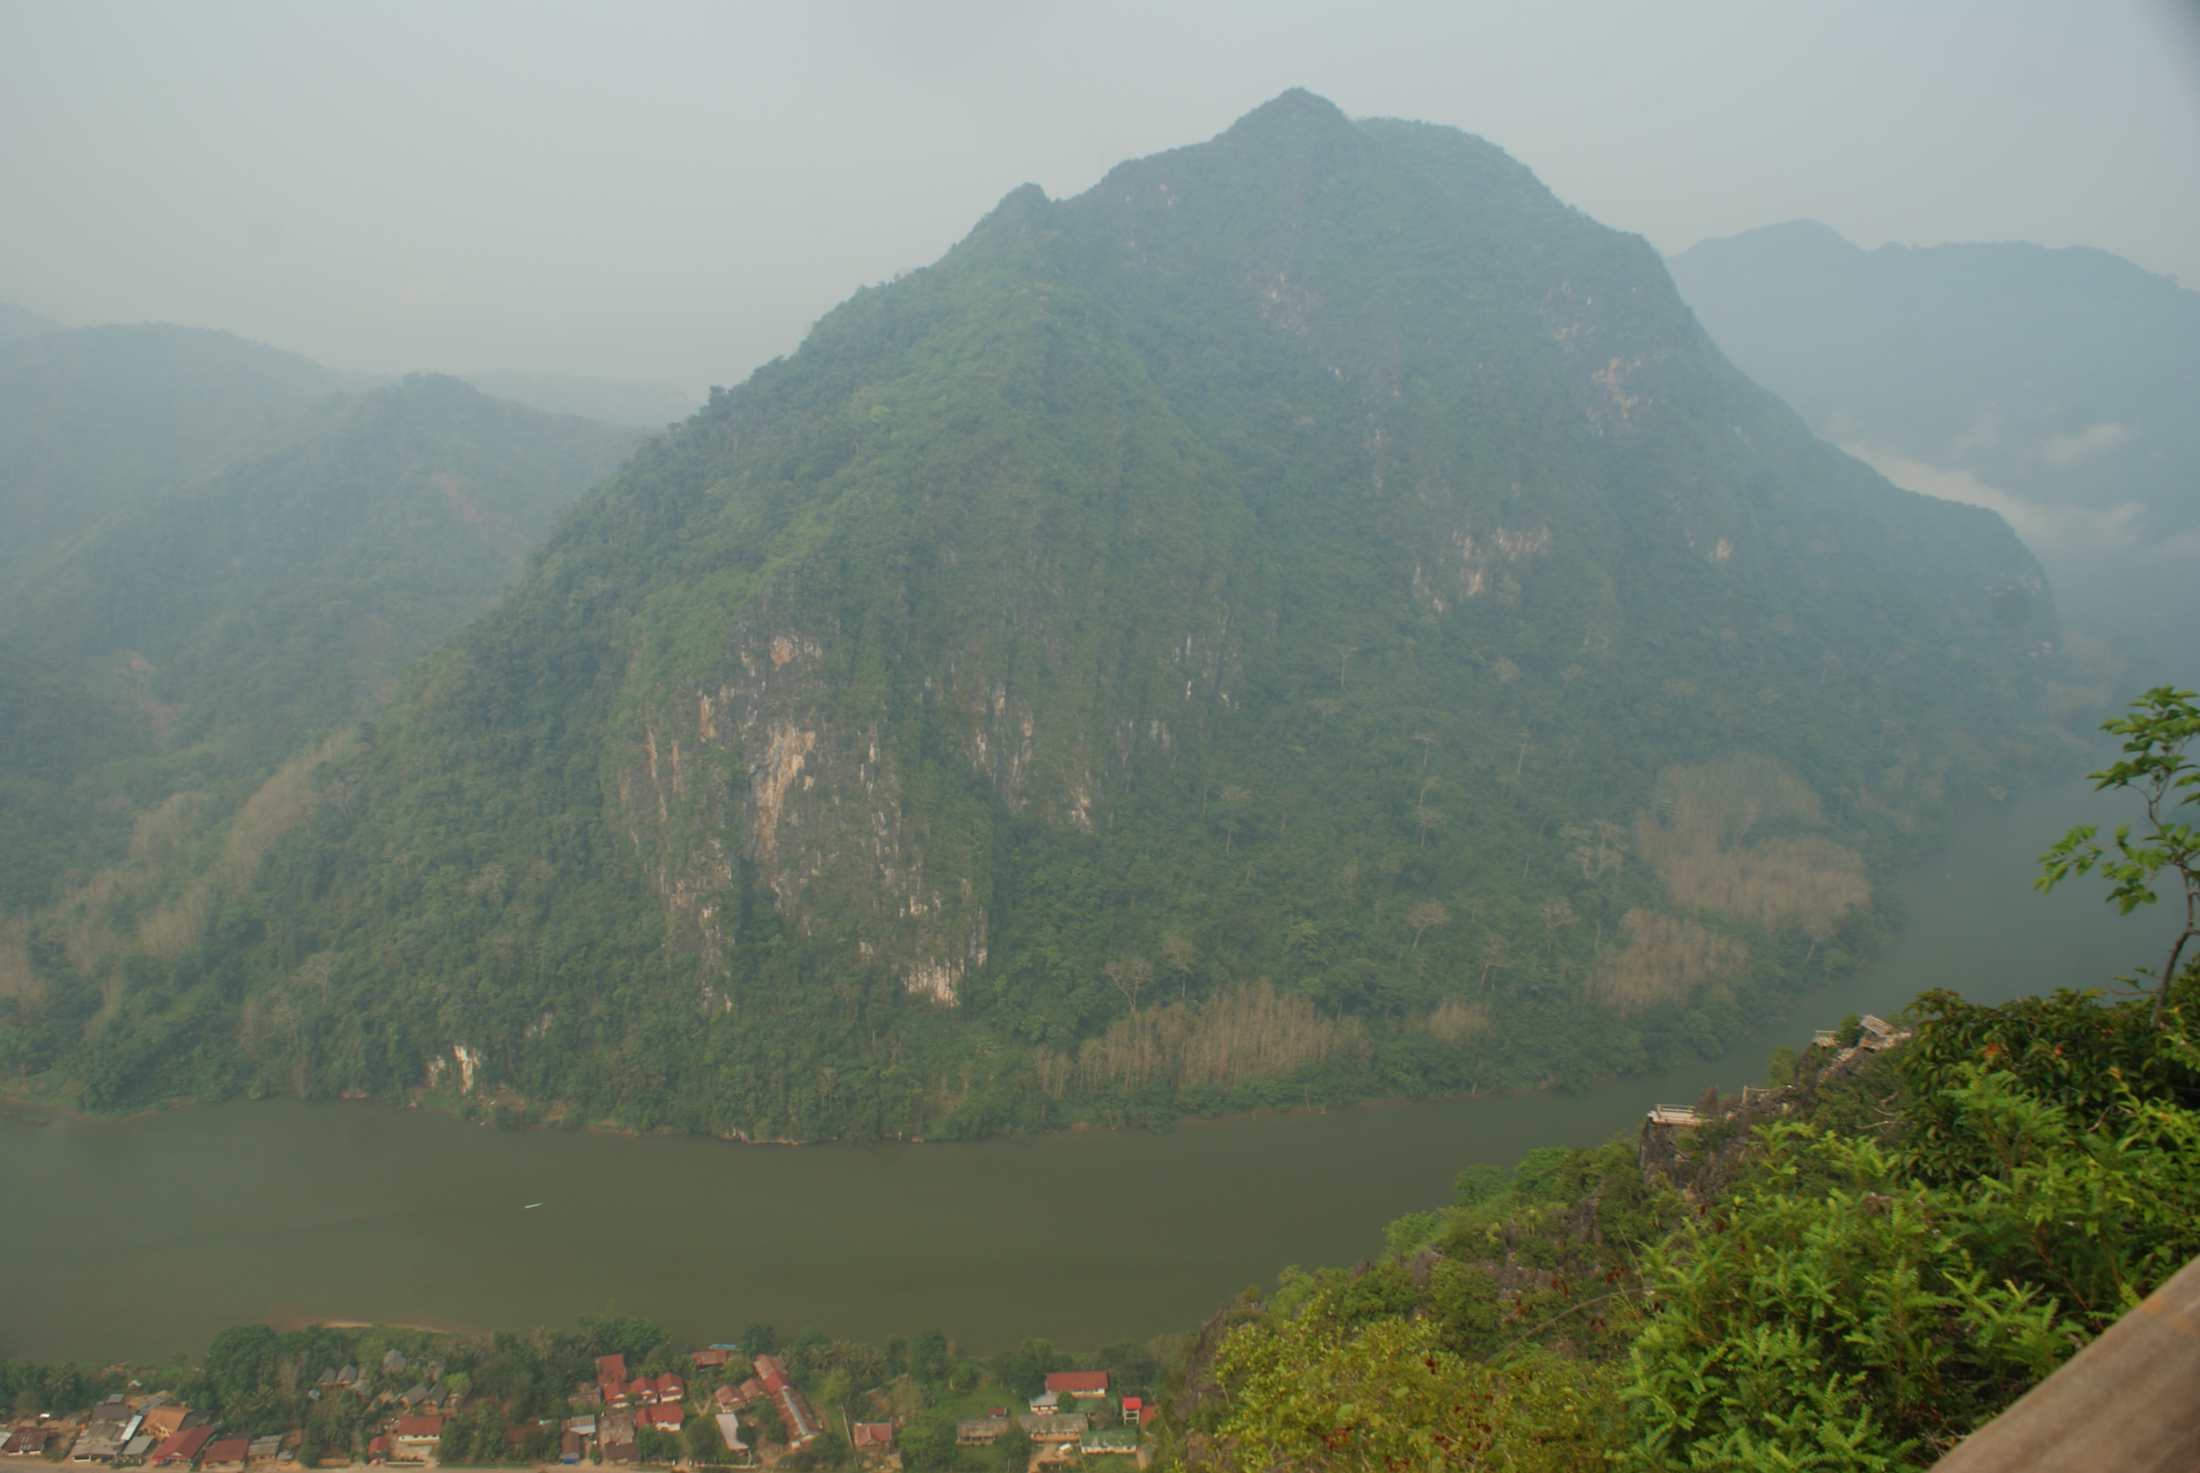 View of the surrounding mountains from Sleeping Woman Viewpoint